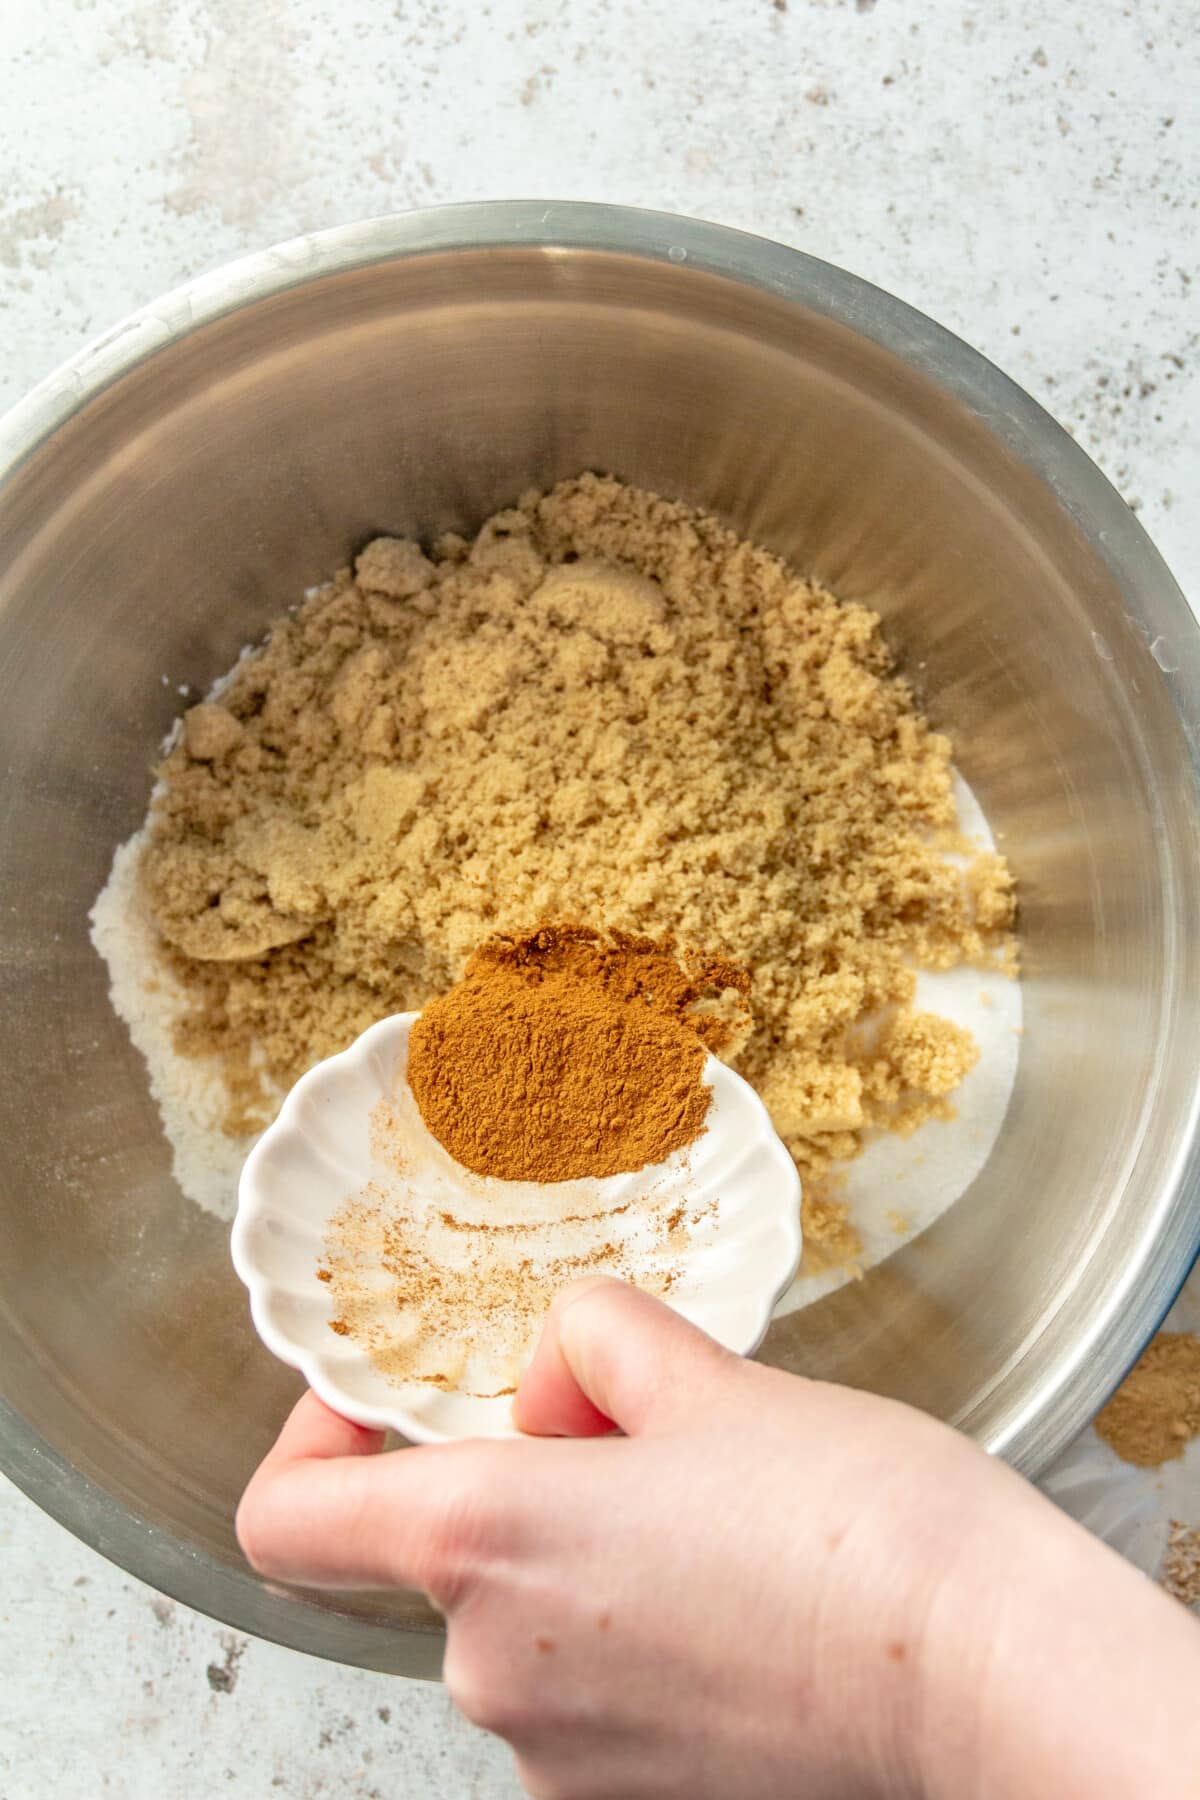 A variety of dry ingredients are shown being added into a large metal mixing bowl.